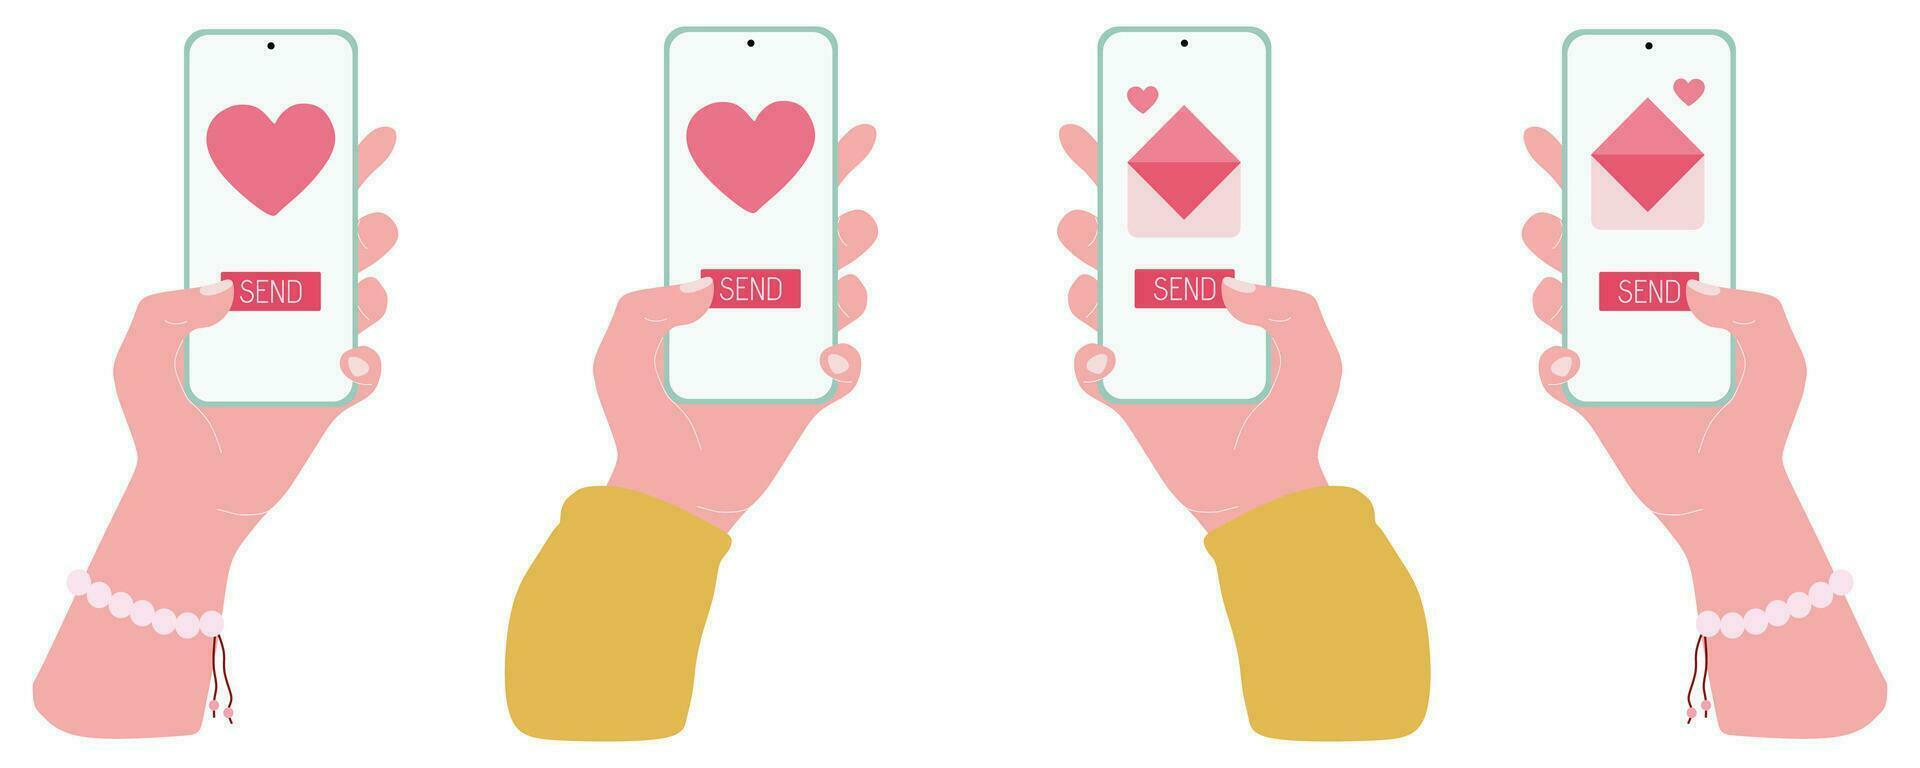 Hand hold Smartphone Vector Set. Send or receive Love sms, Letter, email with Mobile phone. Valentines day Flat illustration on white. Love chatting collection for Poster, Banner, Card, Promotion.